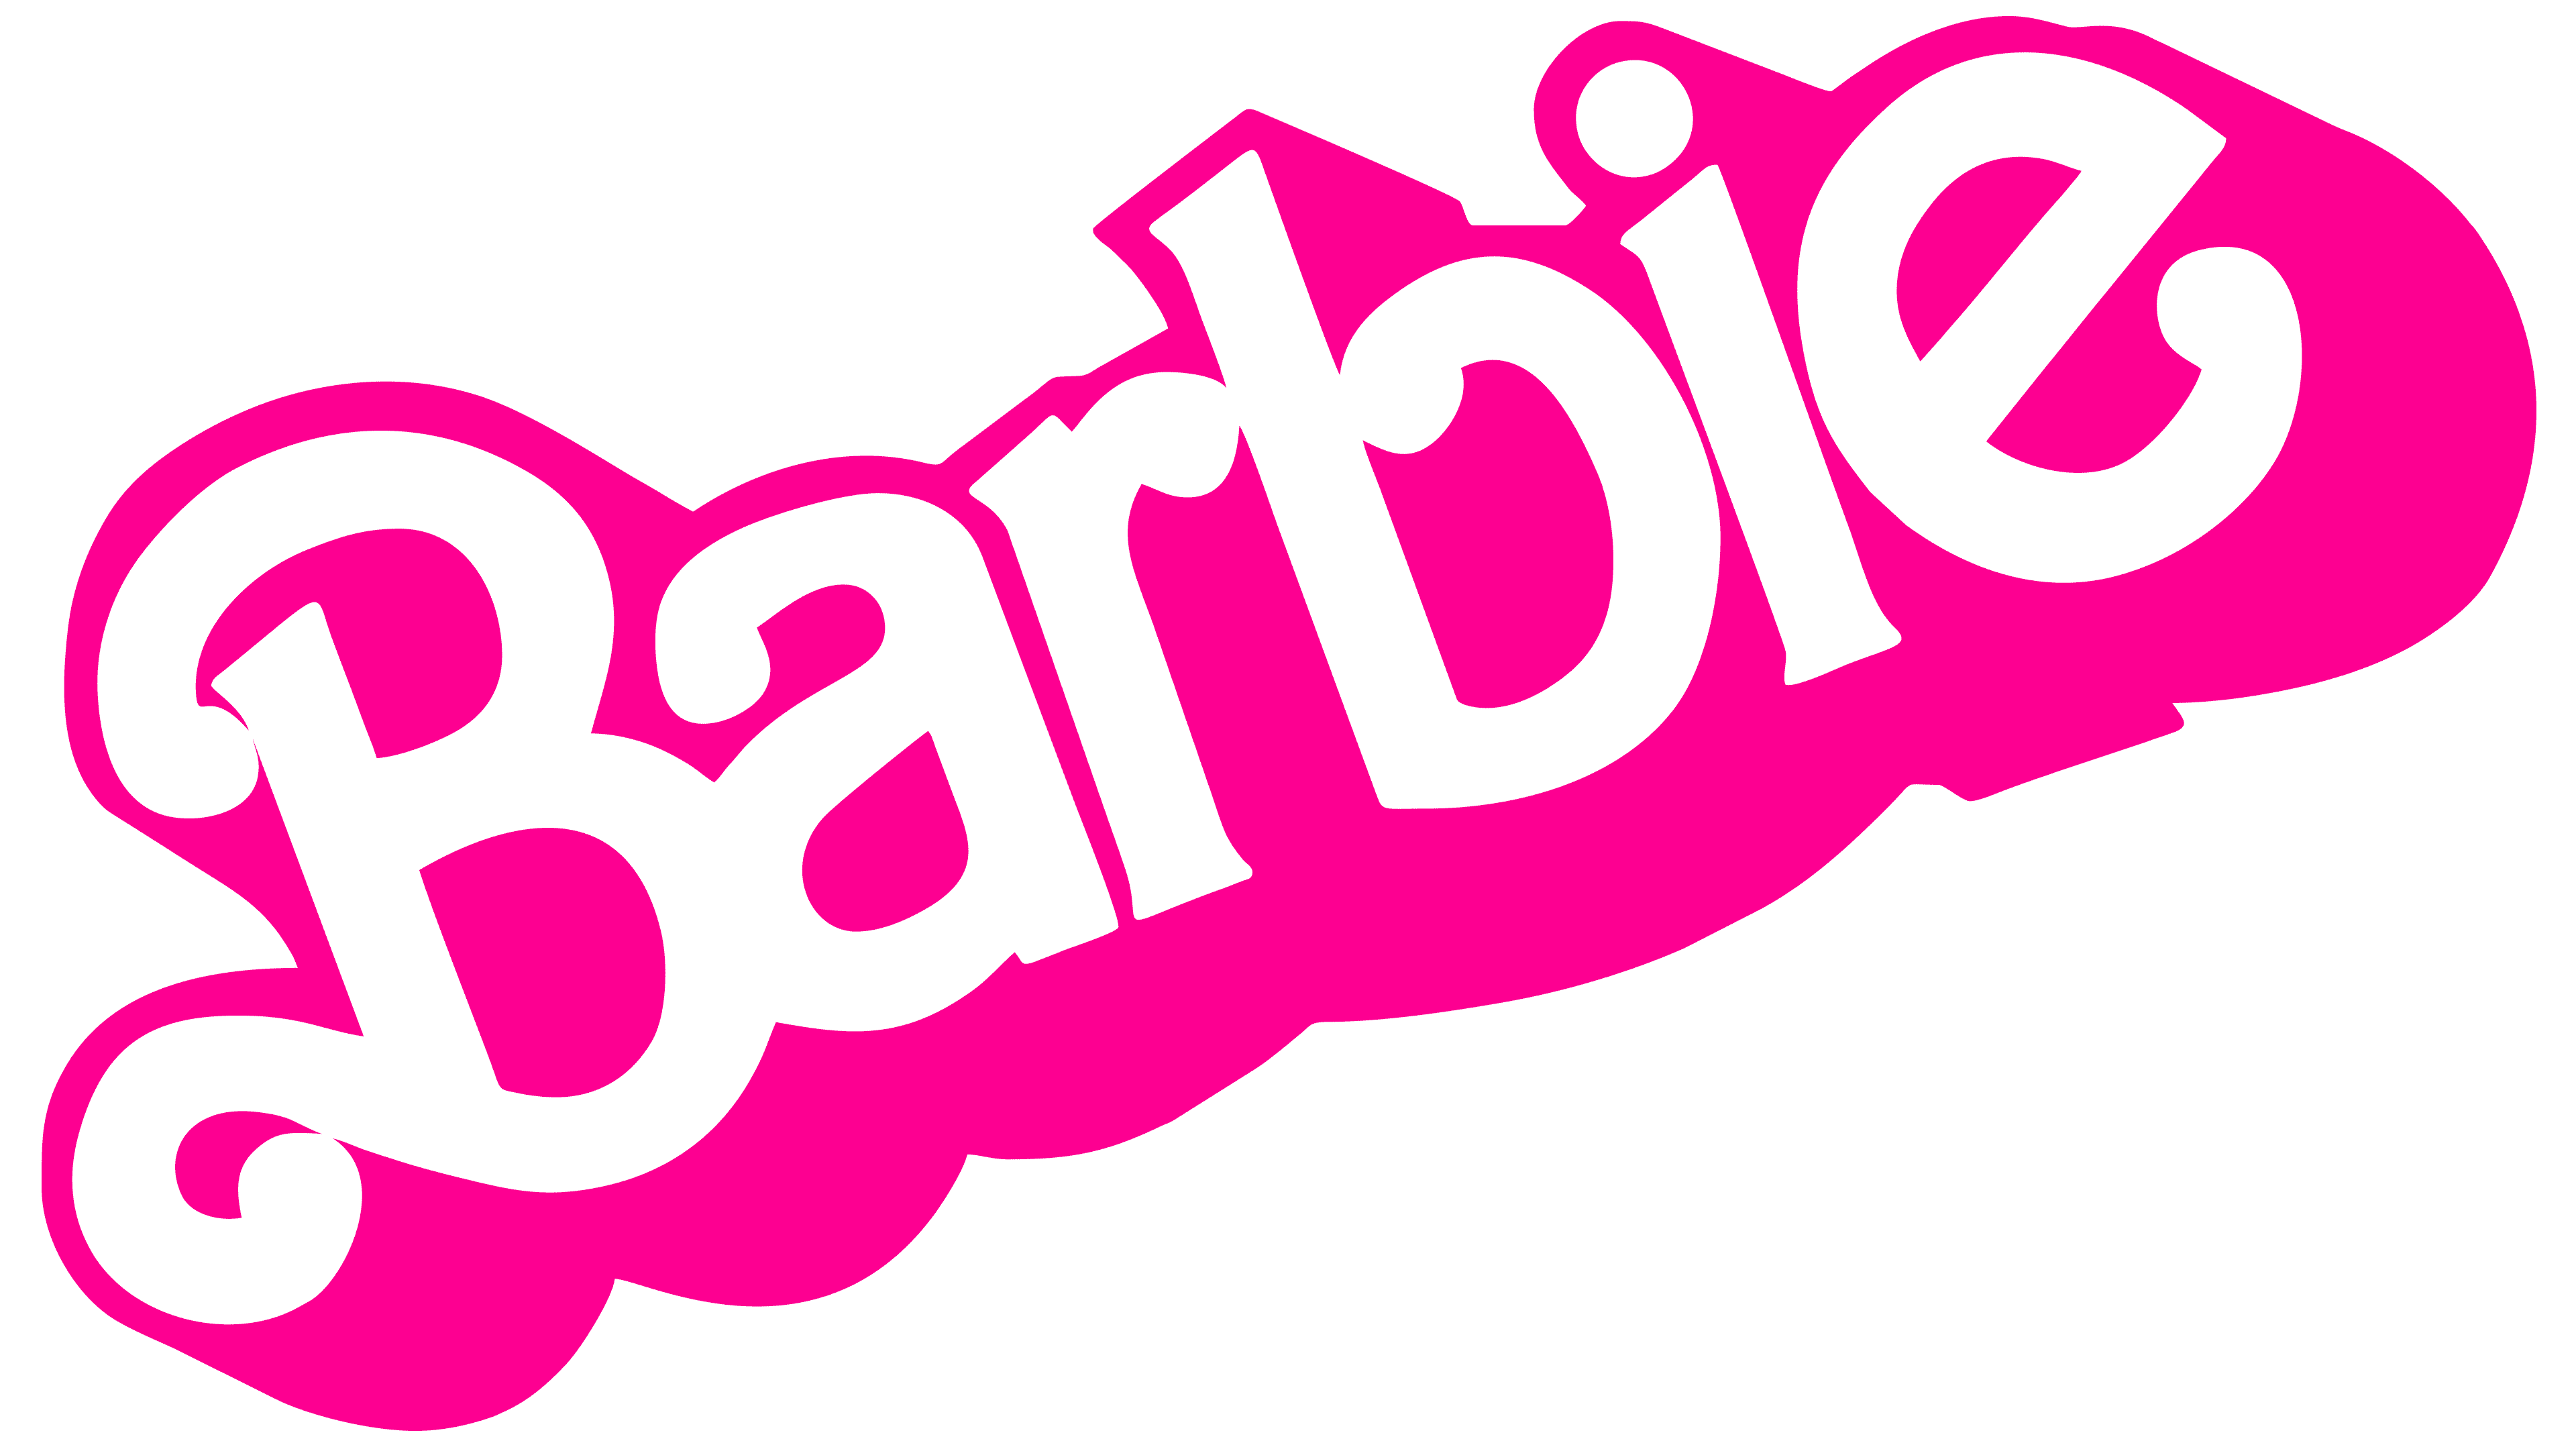 Barbie Logo History | The most famous 